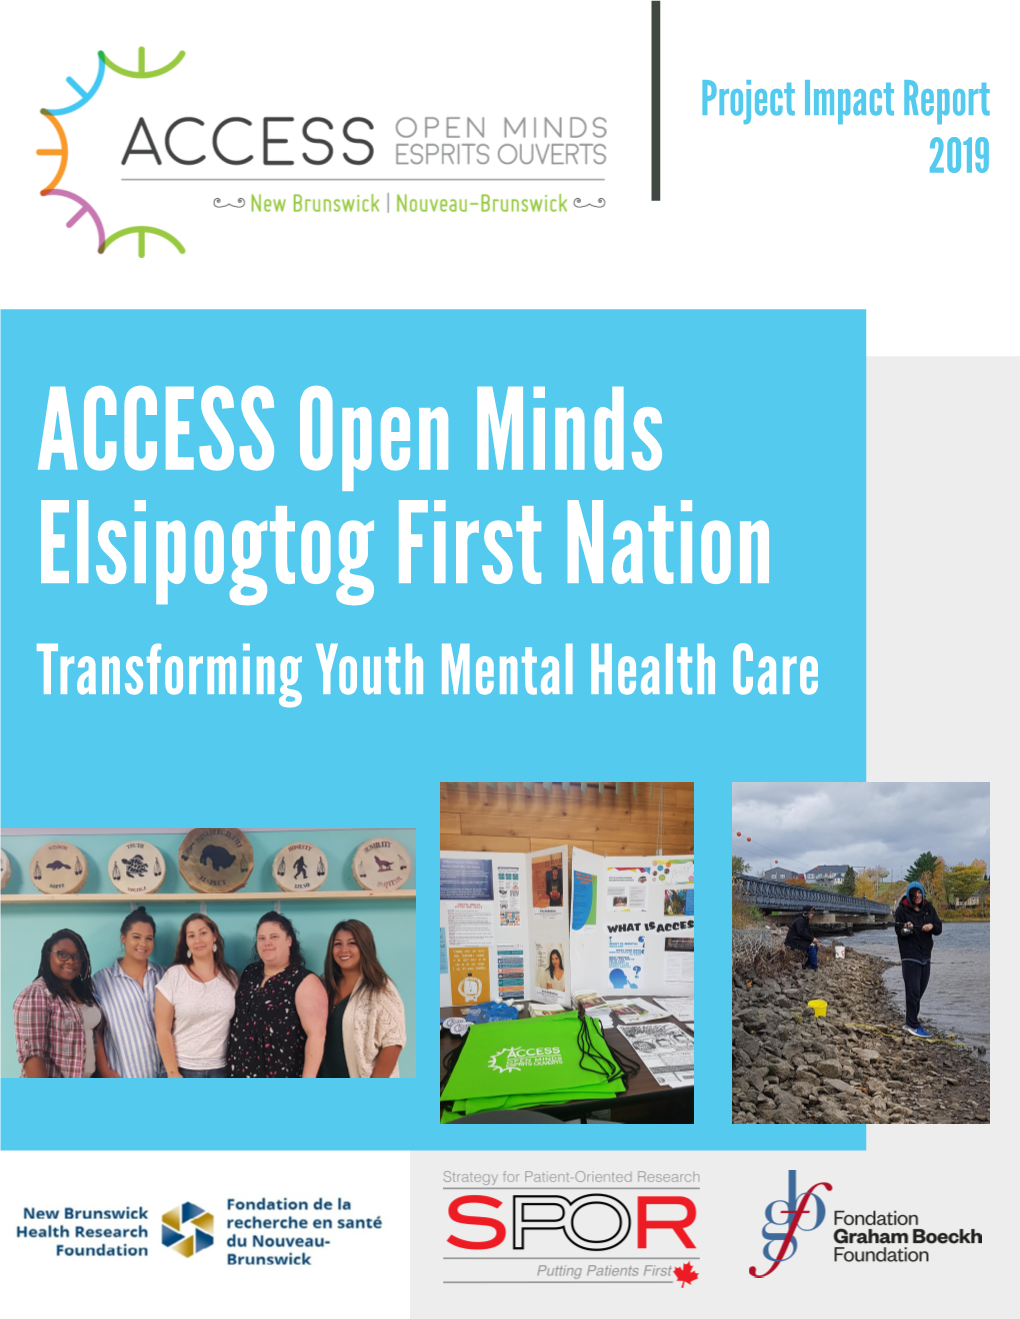 ACCESS Open Minds Elsipogtog First Nation Transforming Youth Mental Health Care CANADIAN INNOVATION in ACTION